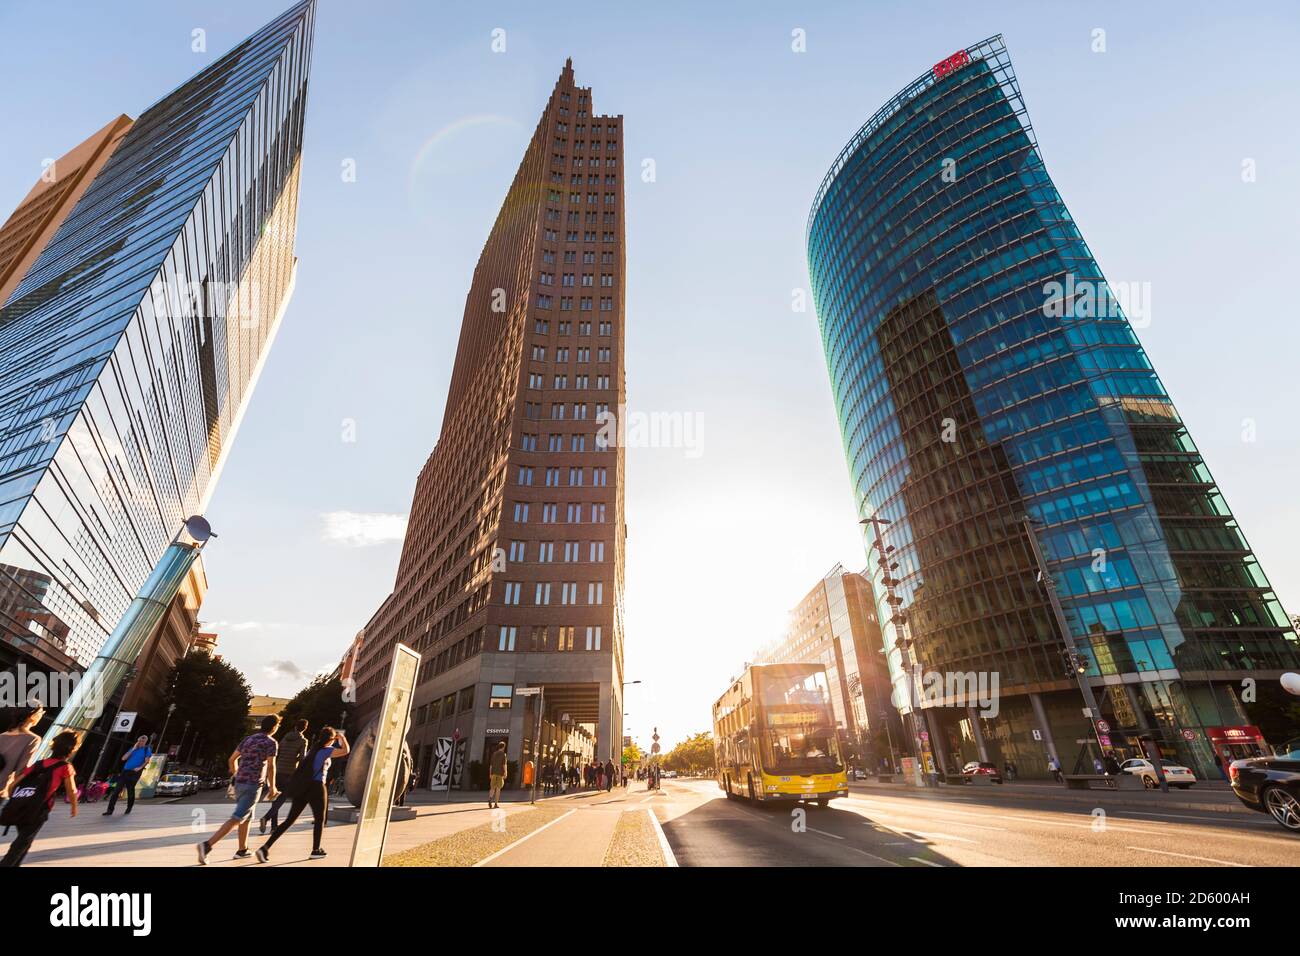 Germany, Berlin, Potsdamer Platz, skyscrapers and double-decker bus at backlight Stock Photo